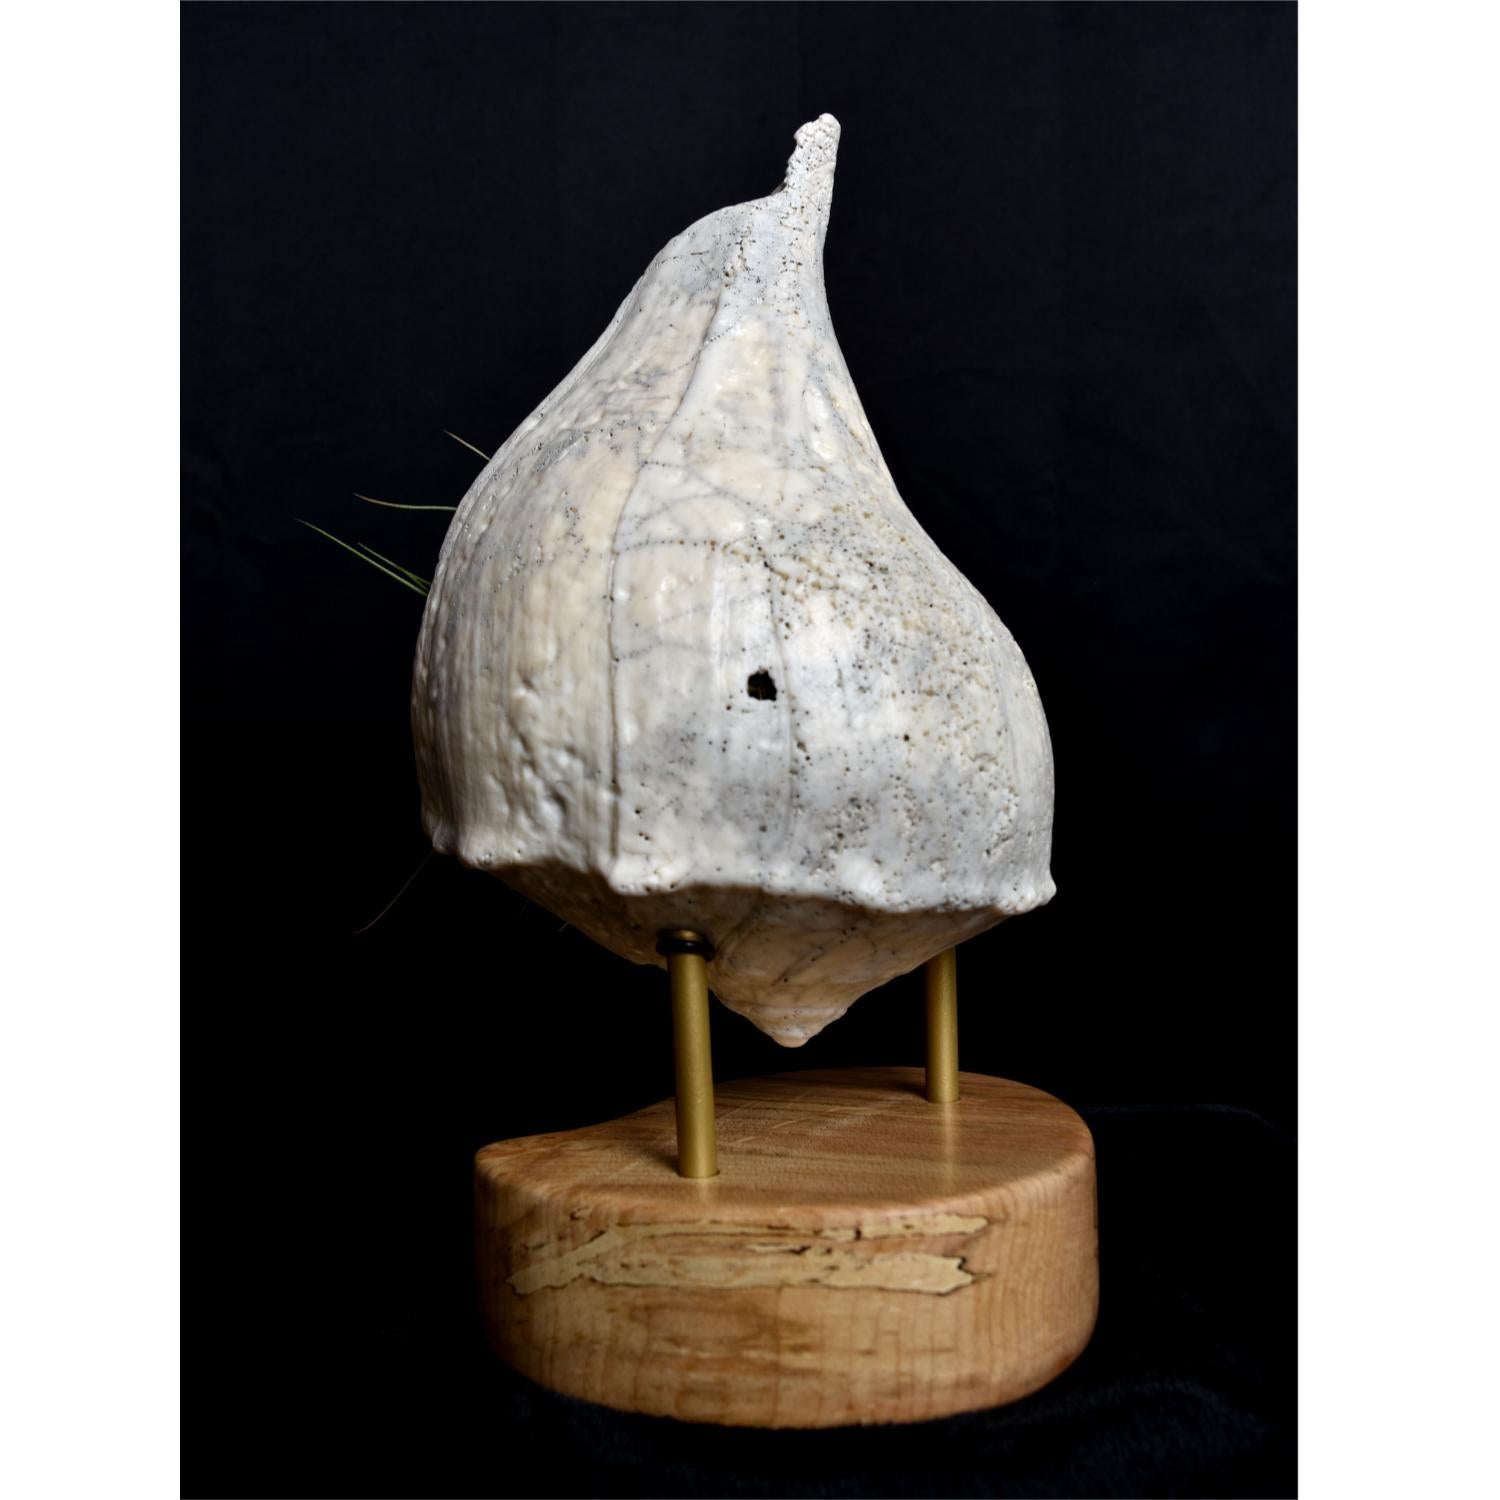 Organic Modern Giant Whelk Conch Sea Shell Living Sculpture & Air Plant on Spalted Maple Base For Sale